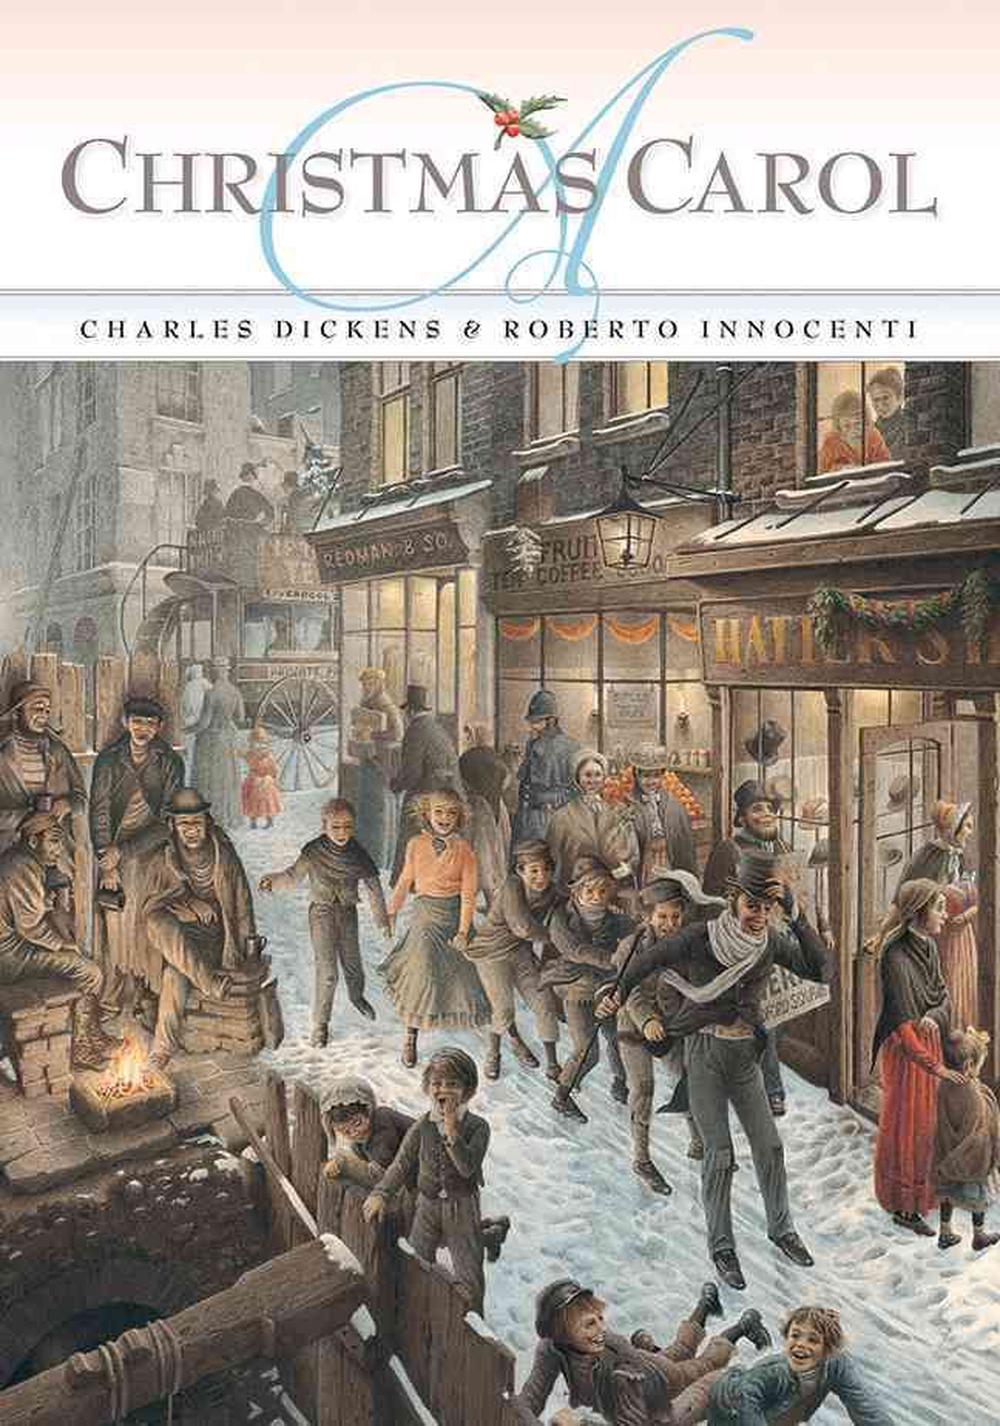 The Annotated Christmas Carol by Charles Dickens